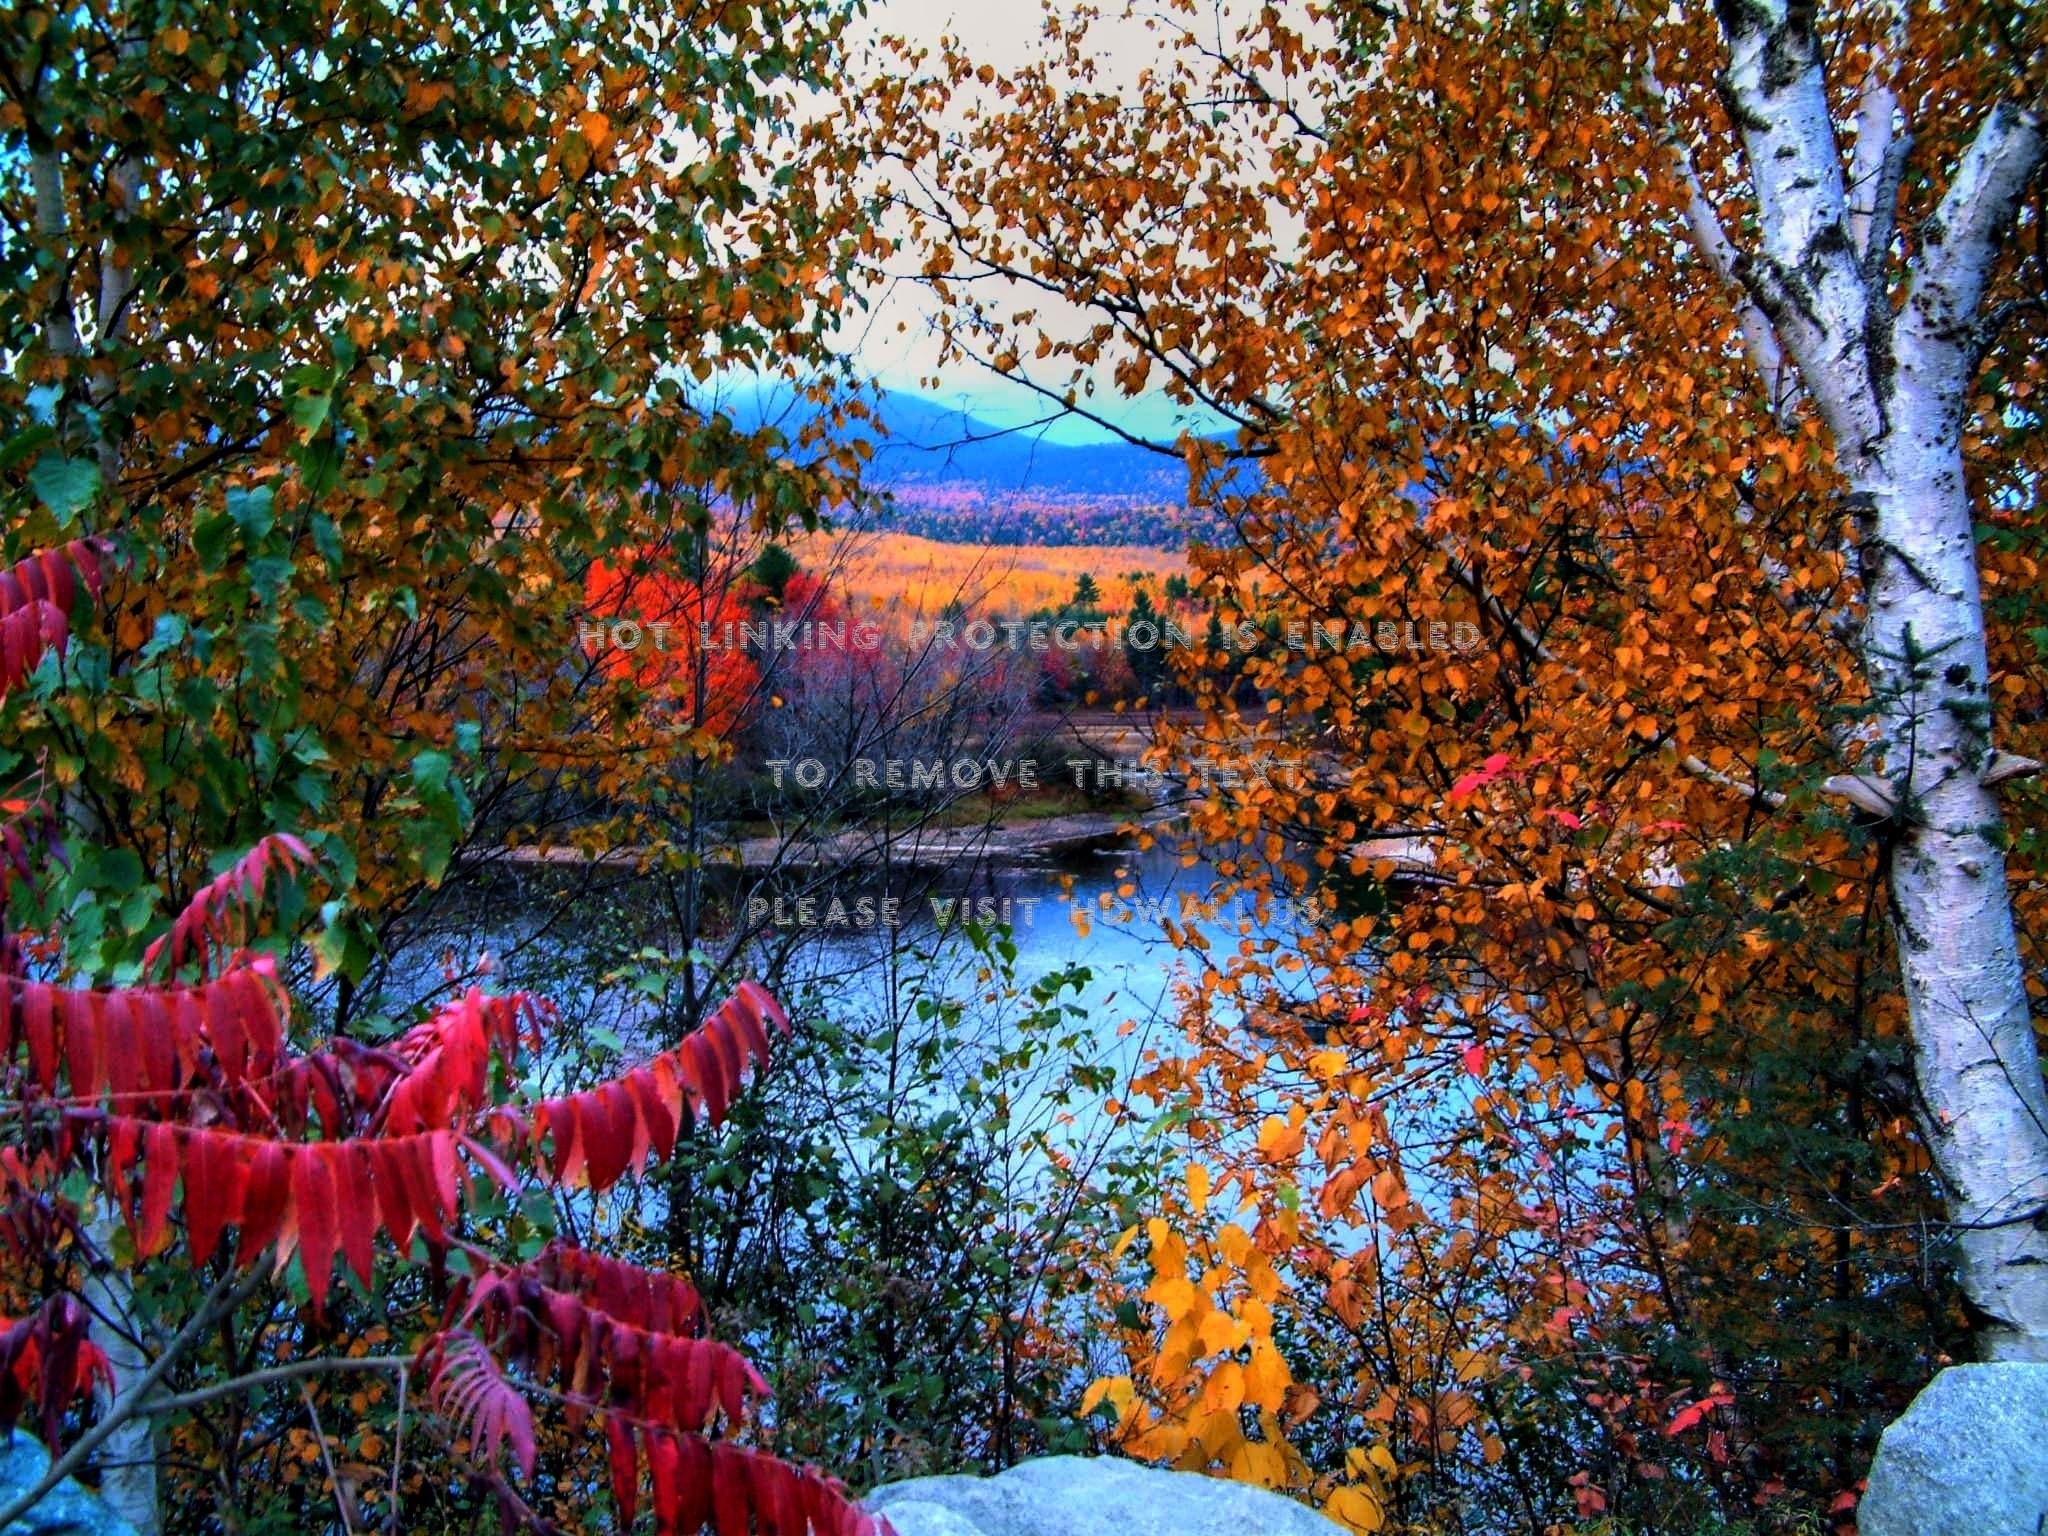 2048x1536 Landscapes Nature Trees Autumn Lakes Colorful Scenery 171617